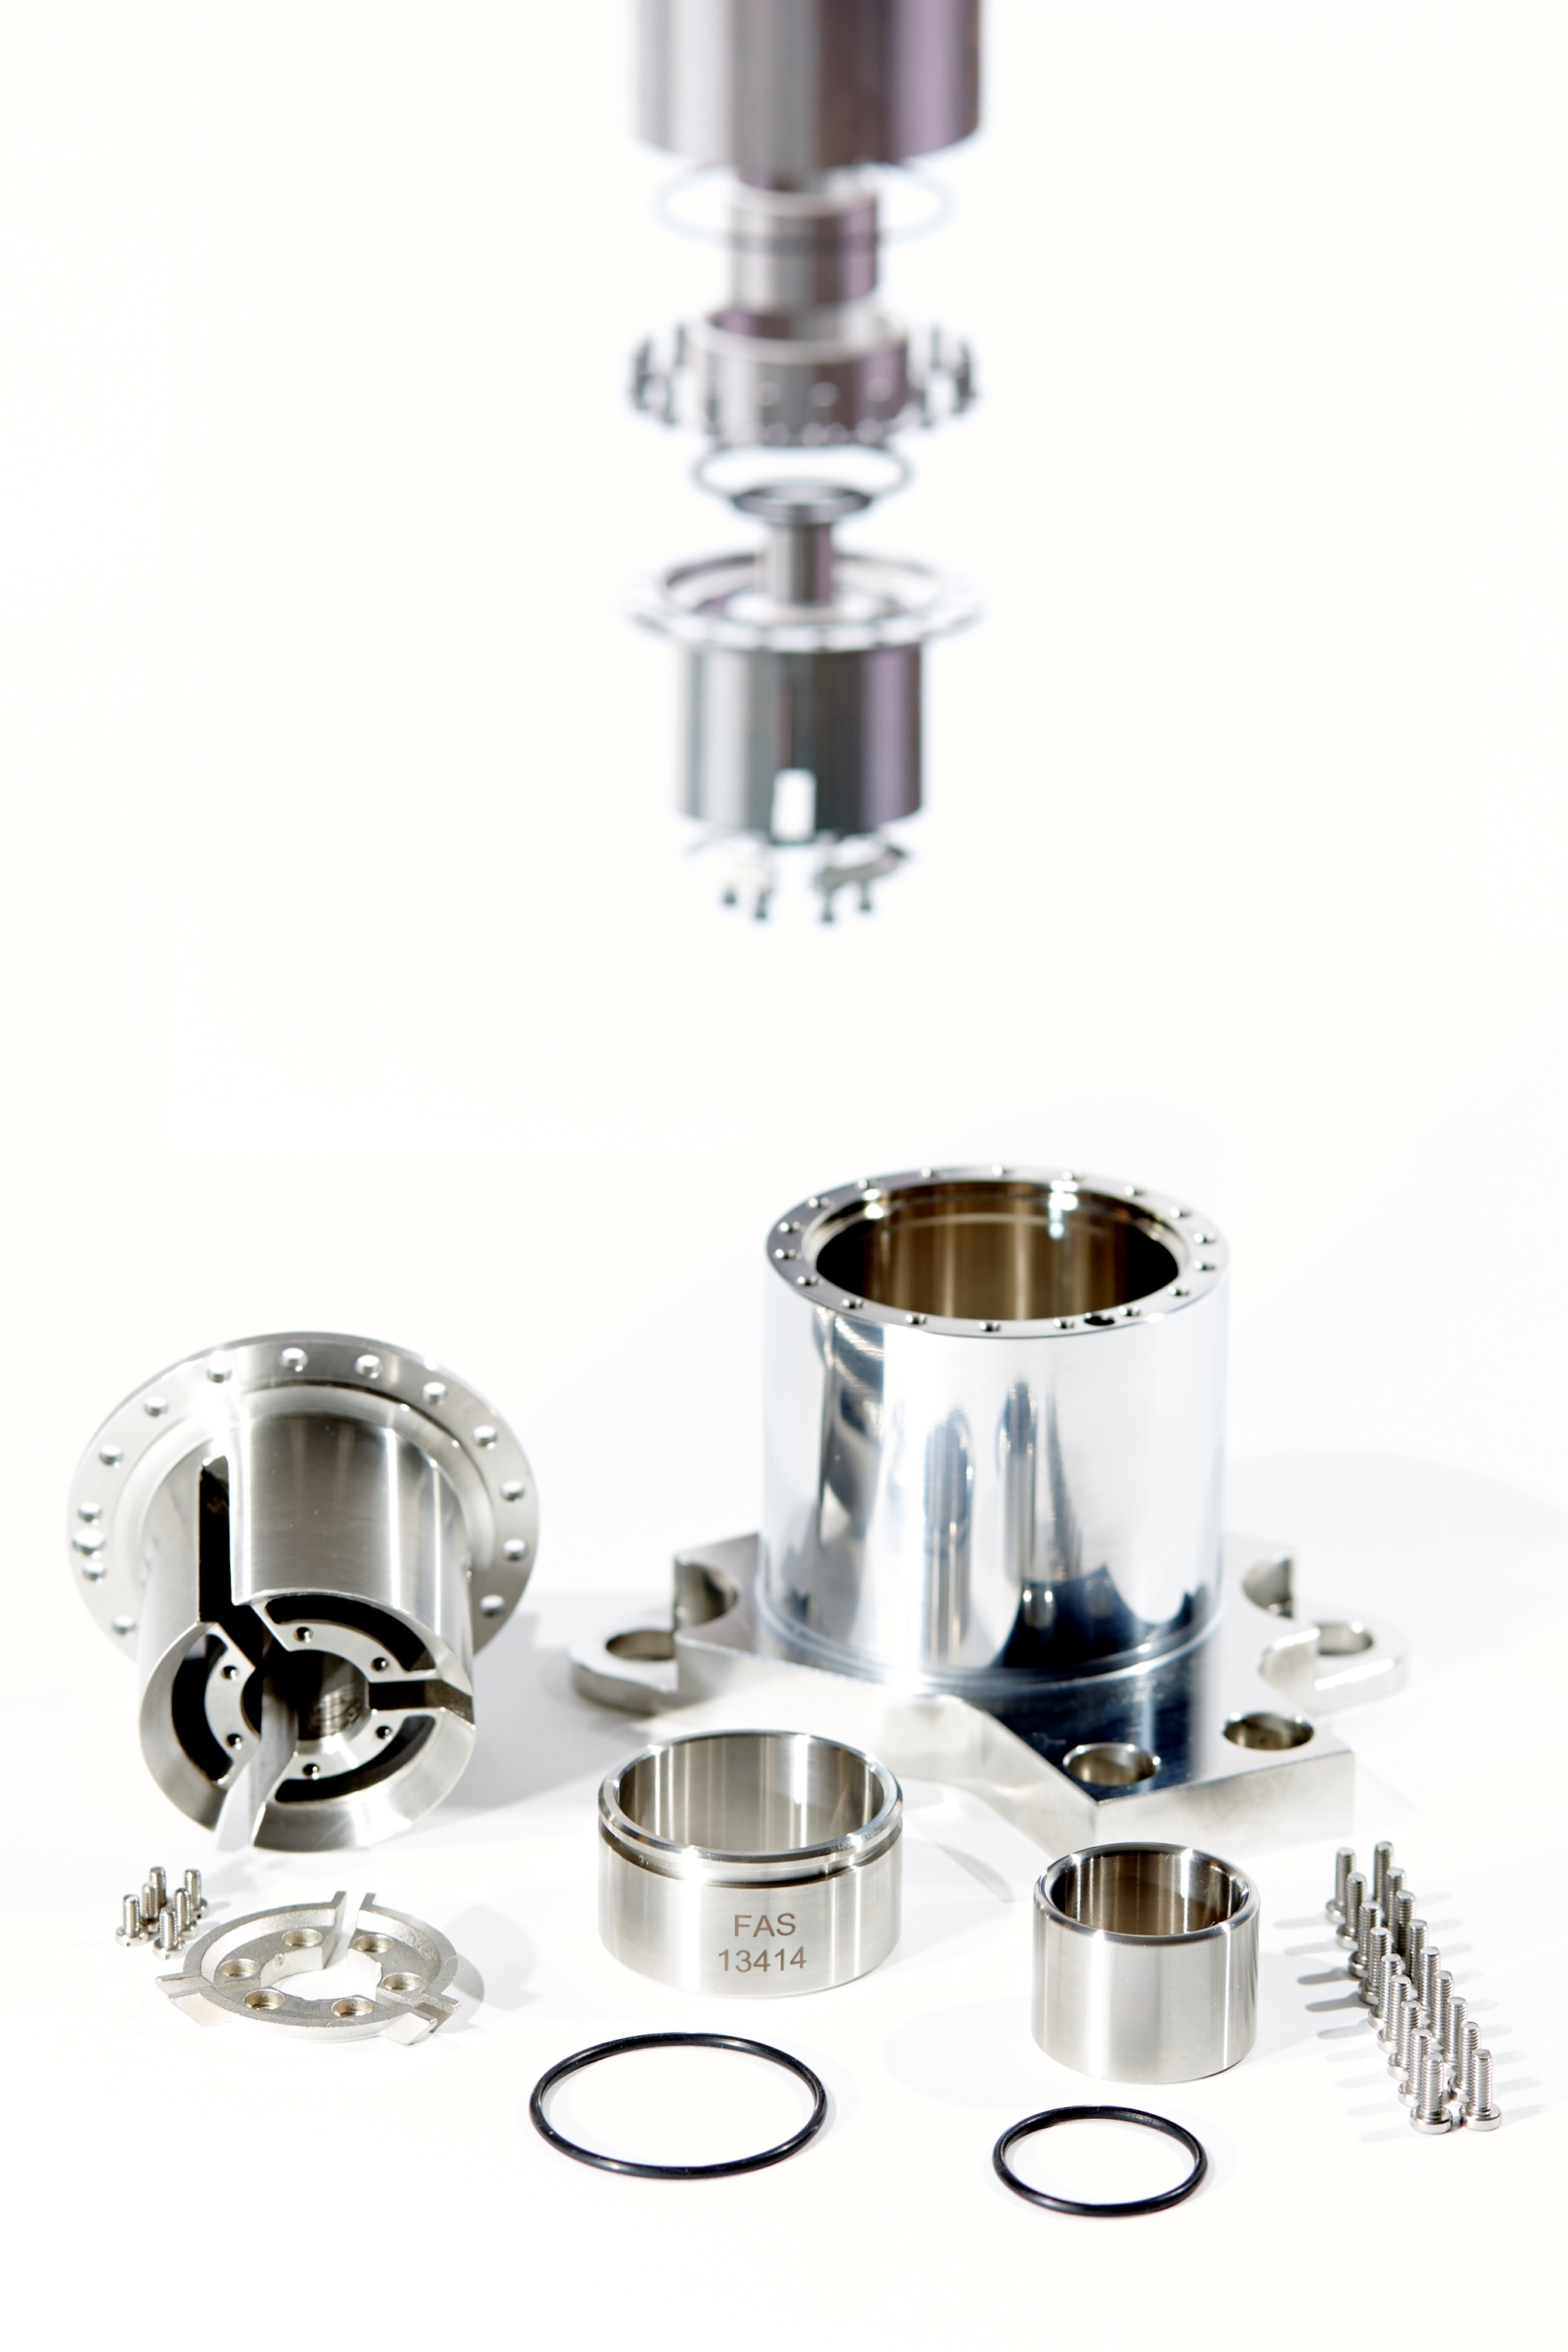 A conventionally manufactured can filler valve consists of seven assemblies, seals and screw connections, and takes a great deal of effort to assemble. Manufacturing the part by conventional means takes around 8-10 weeks including the procurement of the required precision cast part. Image: Jung & Co.